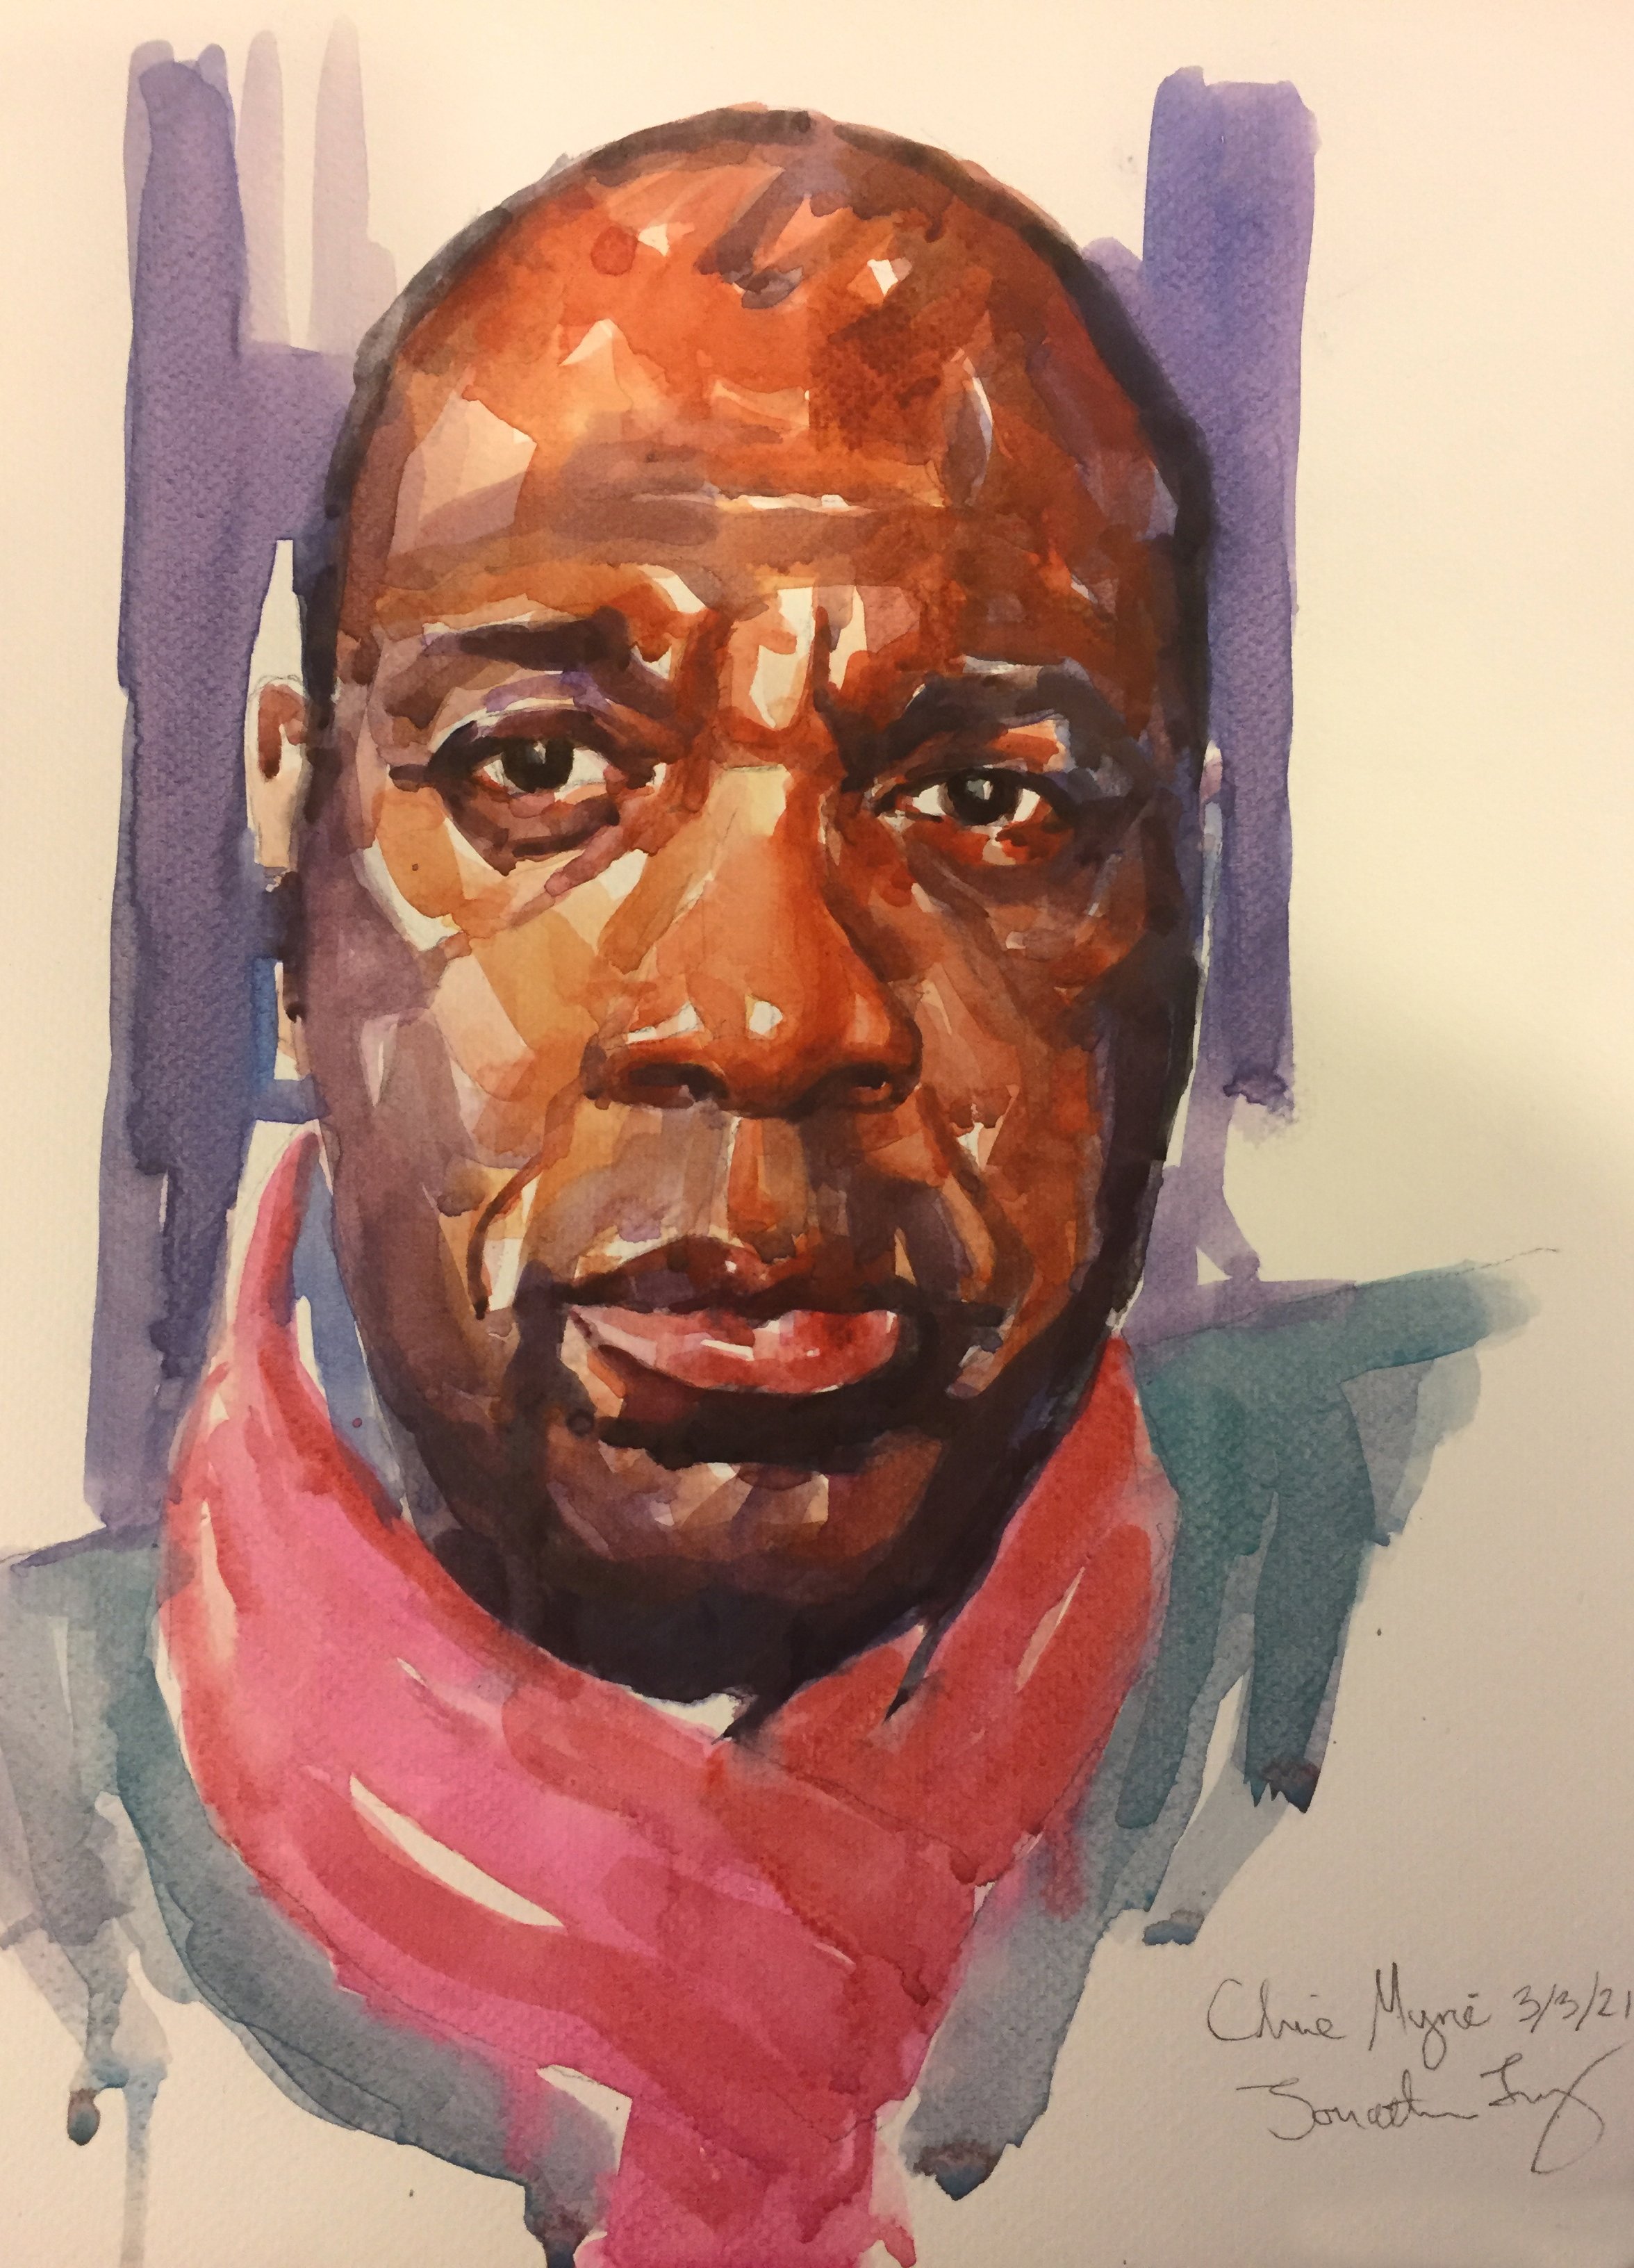 Clive Myrie BBC News presenter and journalist by Jonathan Ing